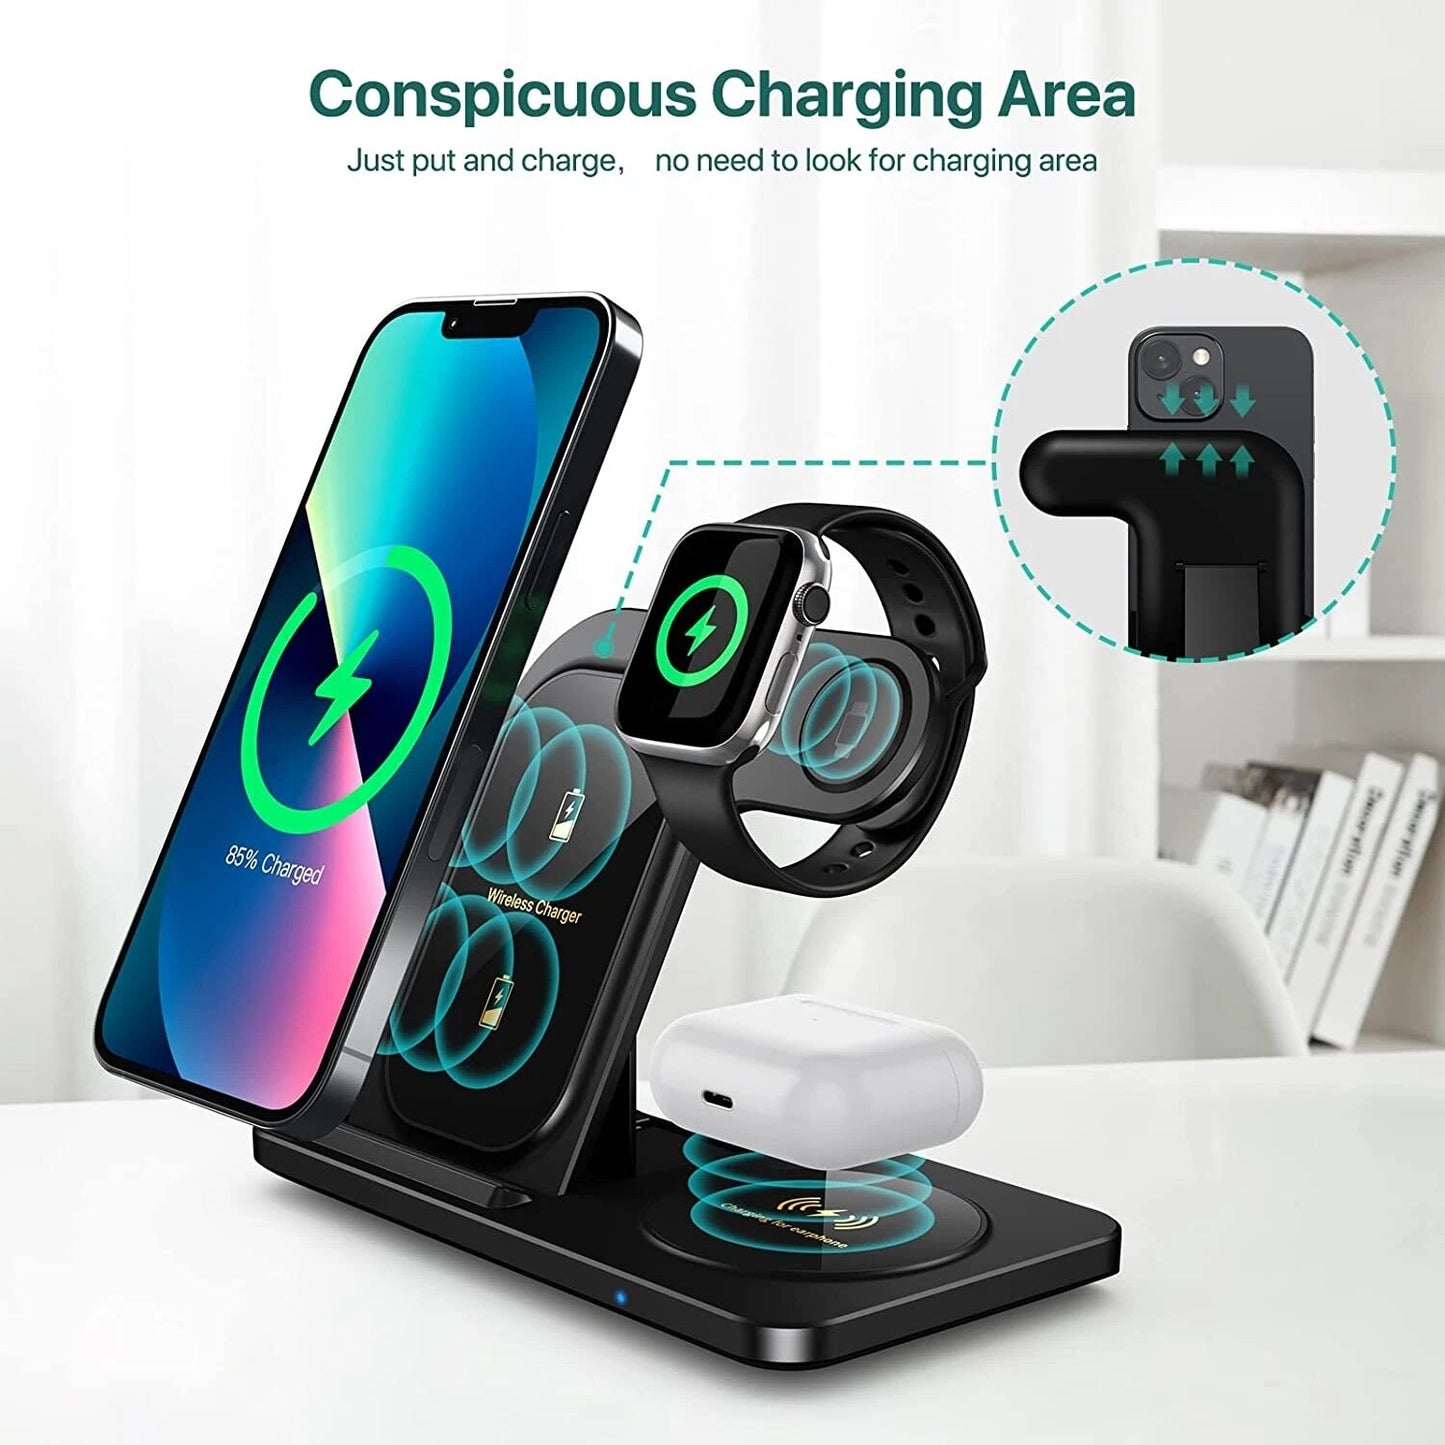 3 in 1 Wireless Charger Stand For iPhone Foldable Charging Station